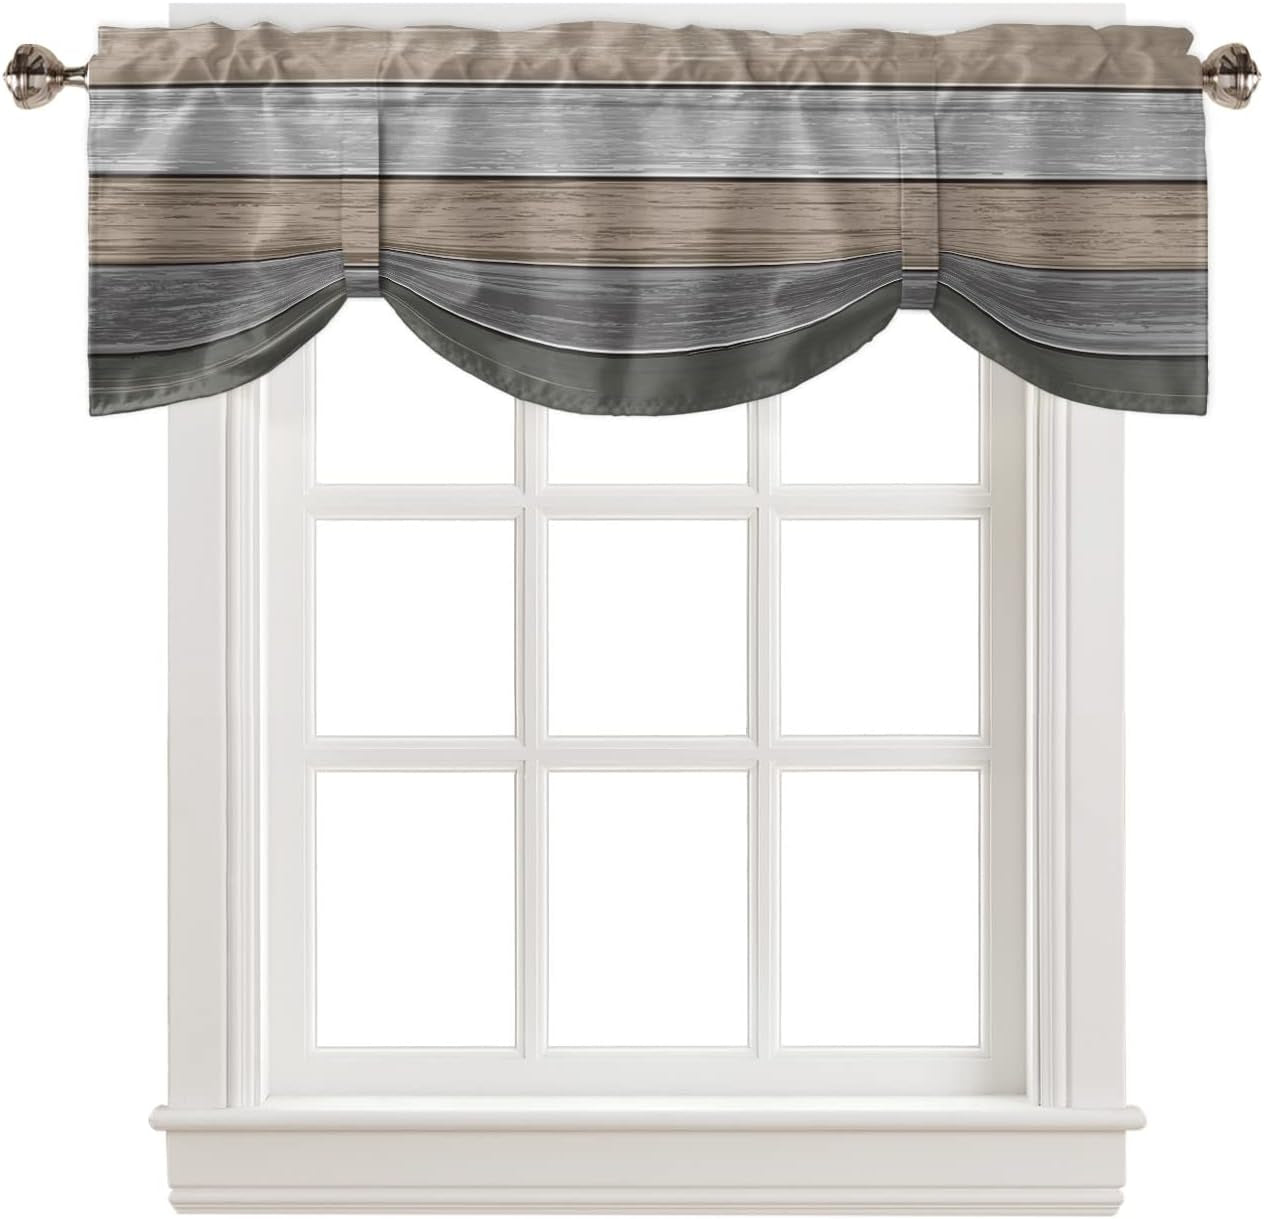 Brown and Gray Tie up Valance Curtains, Vintage Farmhouse Rustic Gradient Retro Wood Grain Window Valance for Kitchen Cafe Bathroom Rod Pocket Window Treatment Valances 54 X 18Inch, 1 Panel